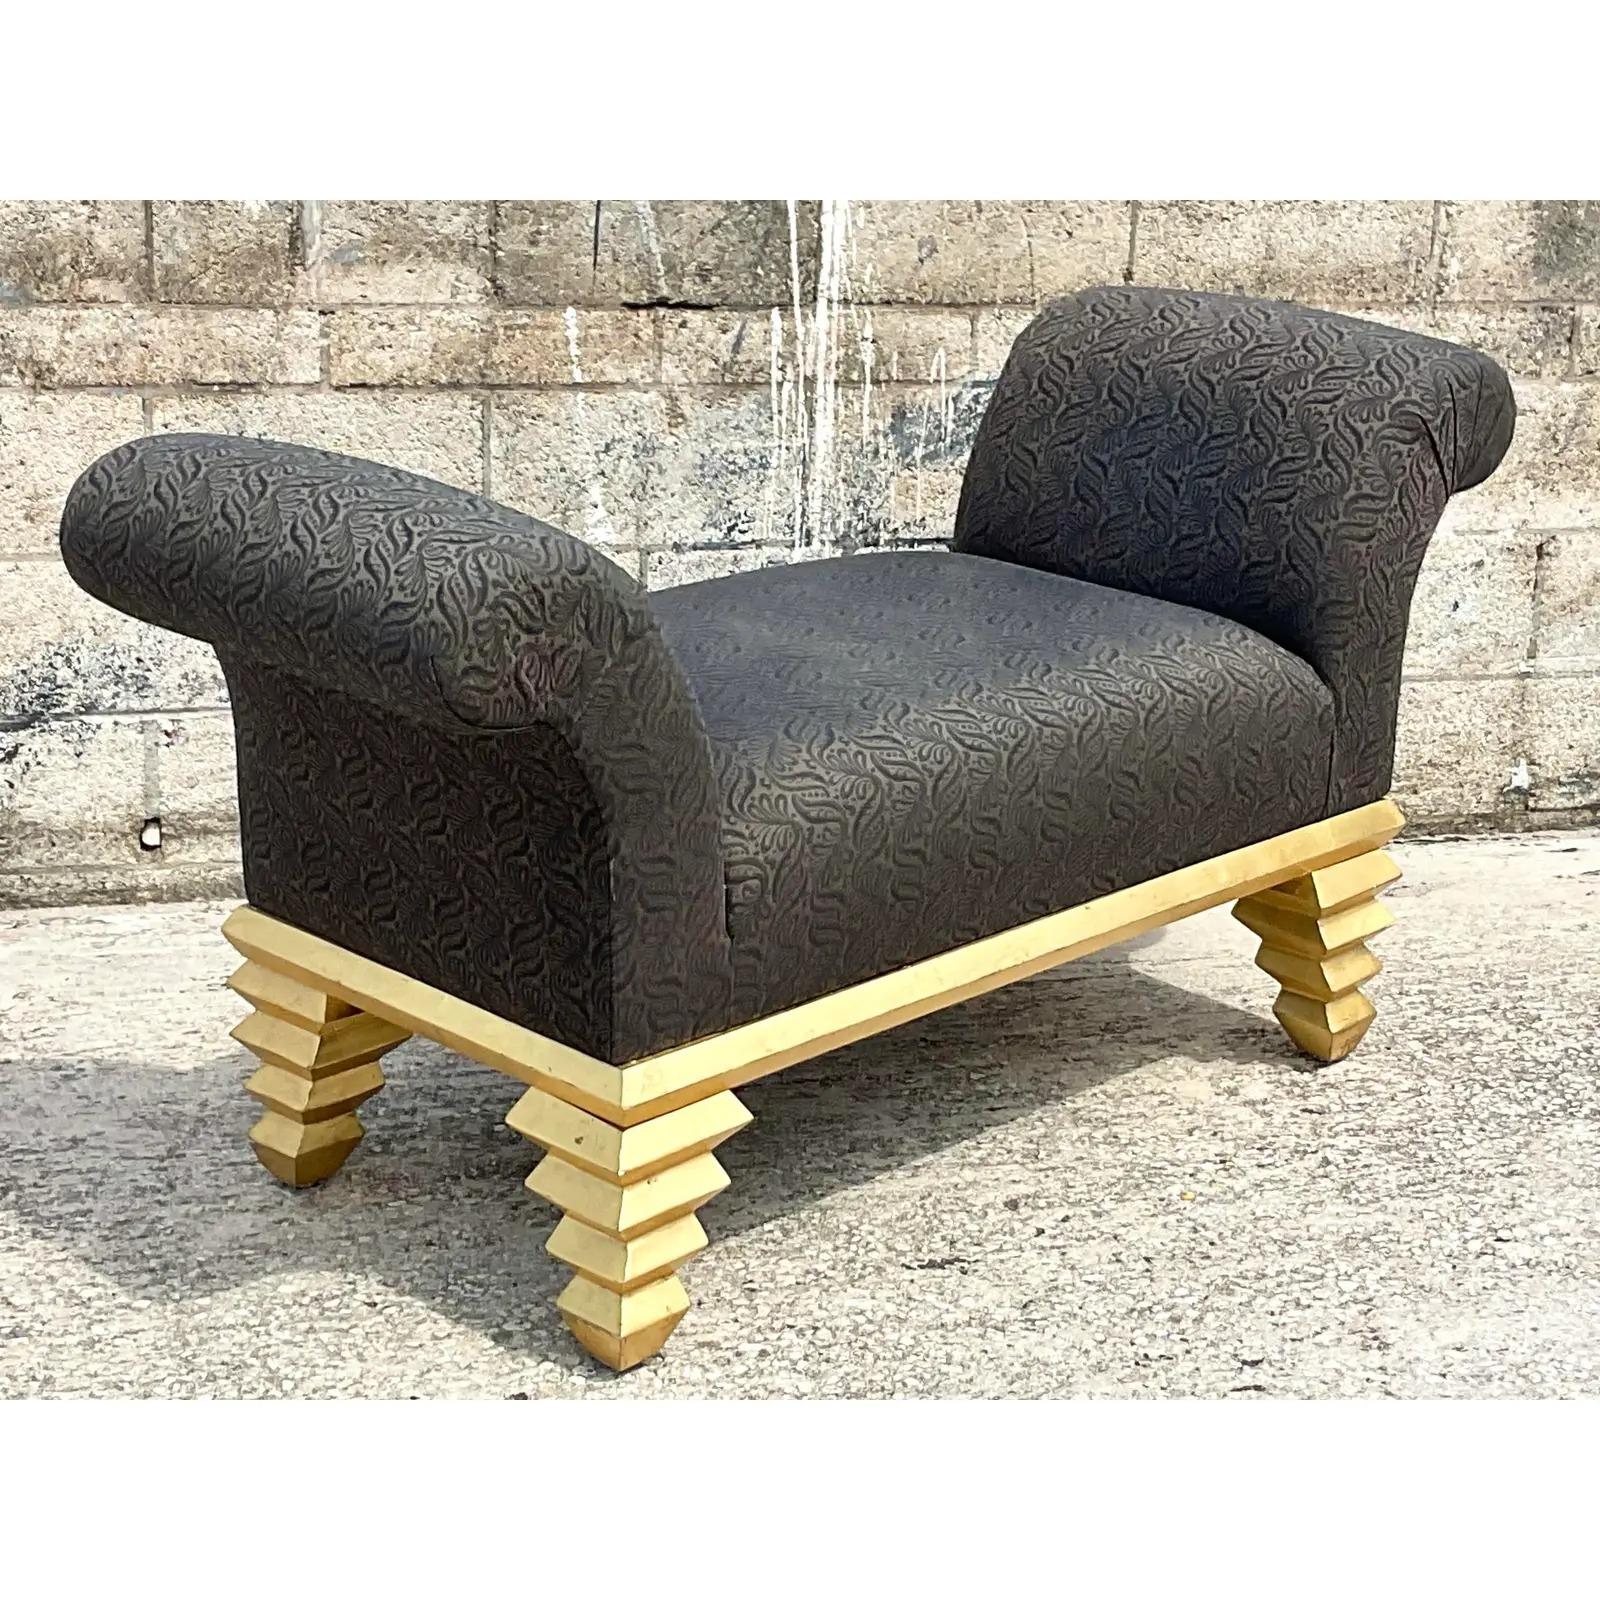 Fantastic vintage Postmodern bench. High scroll arms in a black paisley jacquard. Carved zig zag wood base with a bright gold finish. Super glamorous. Acquired from a Palm Beach estate.